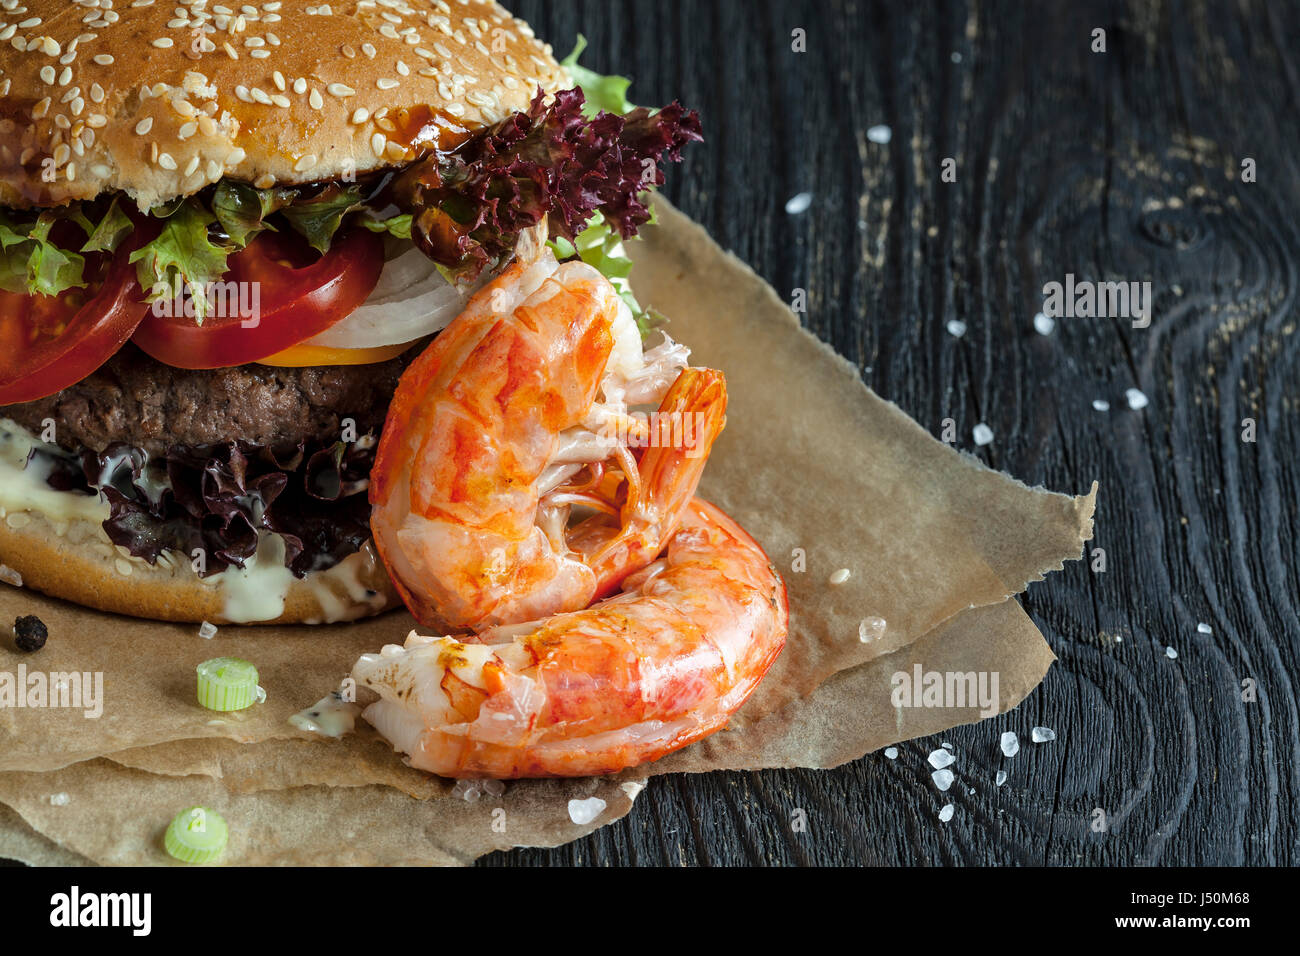 Delicious fresh homemade surf and turf  burger on wooden table Stock Photo